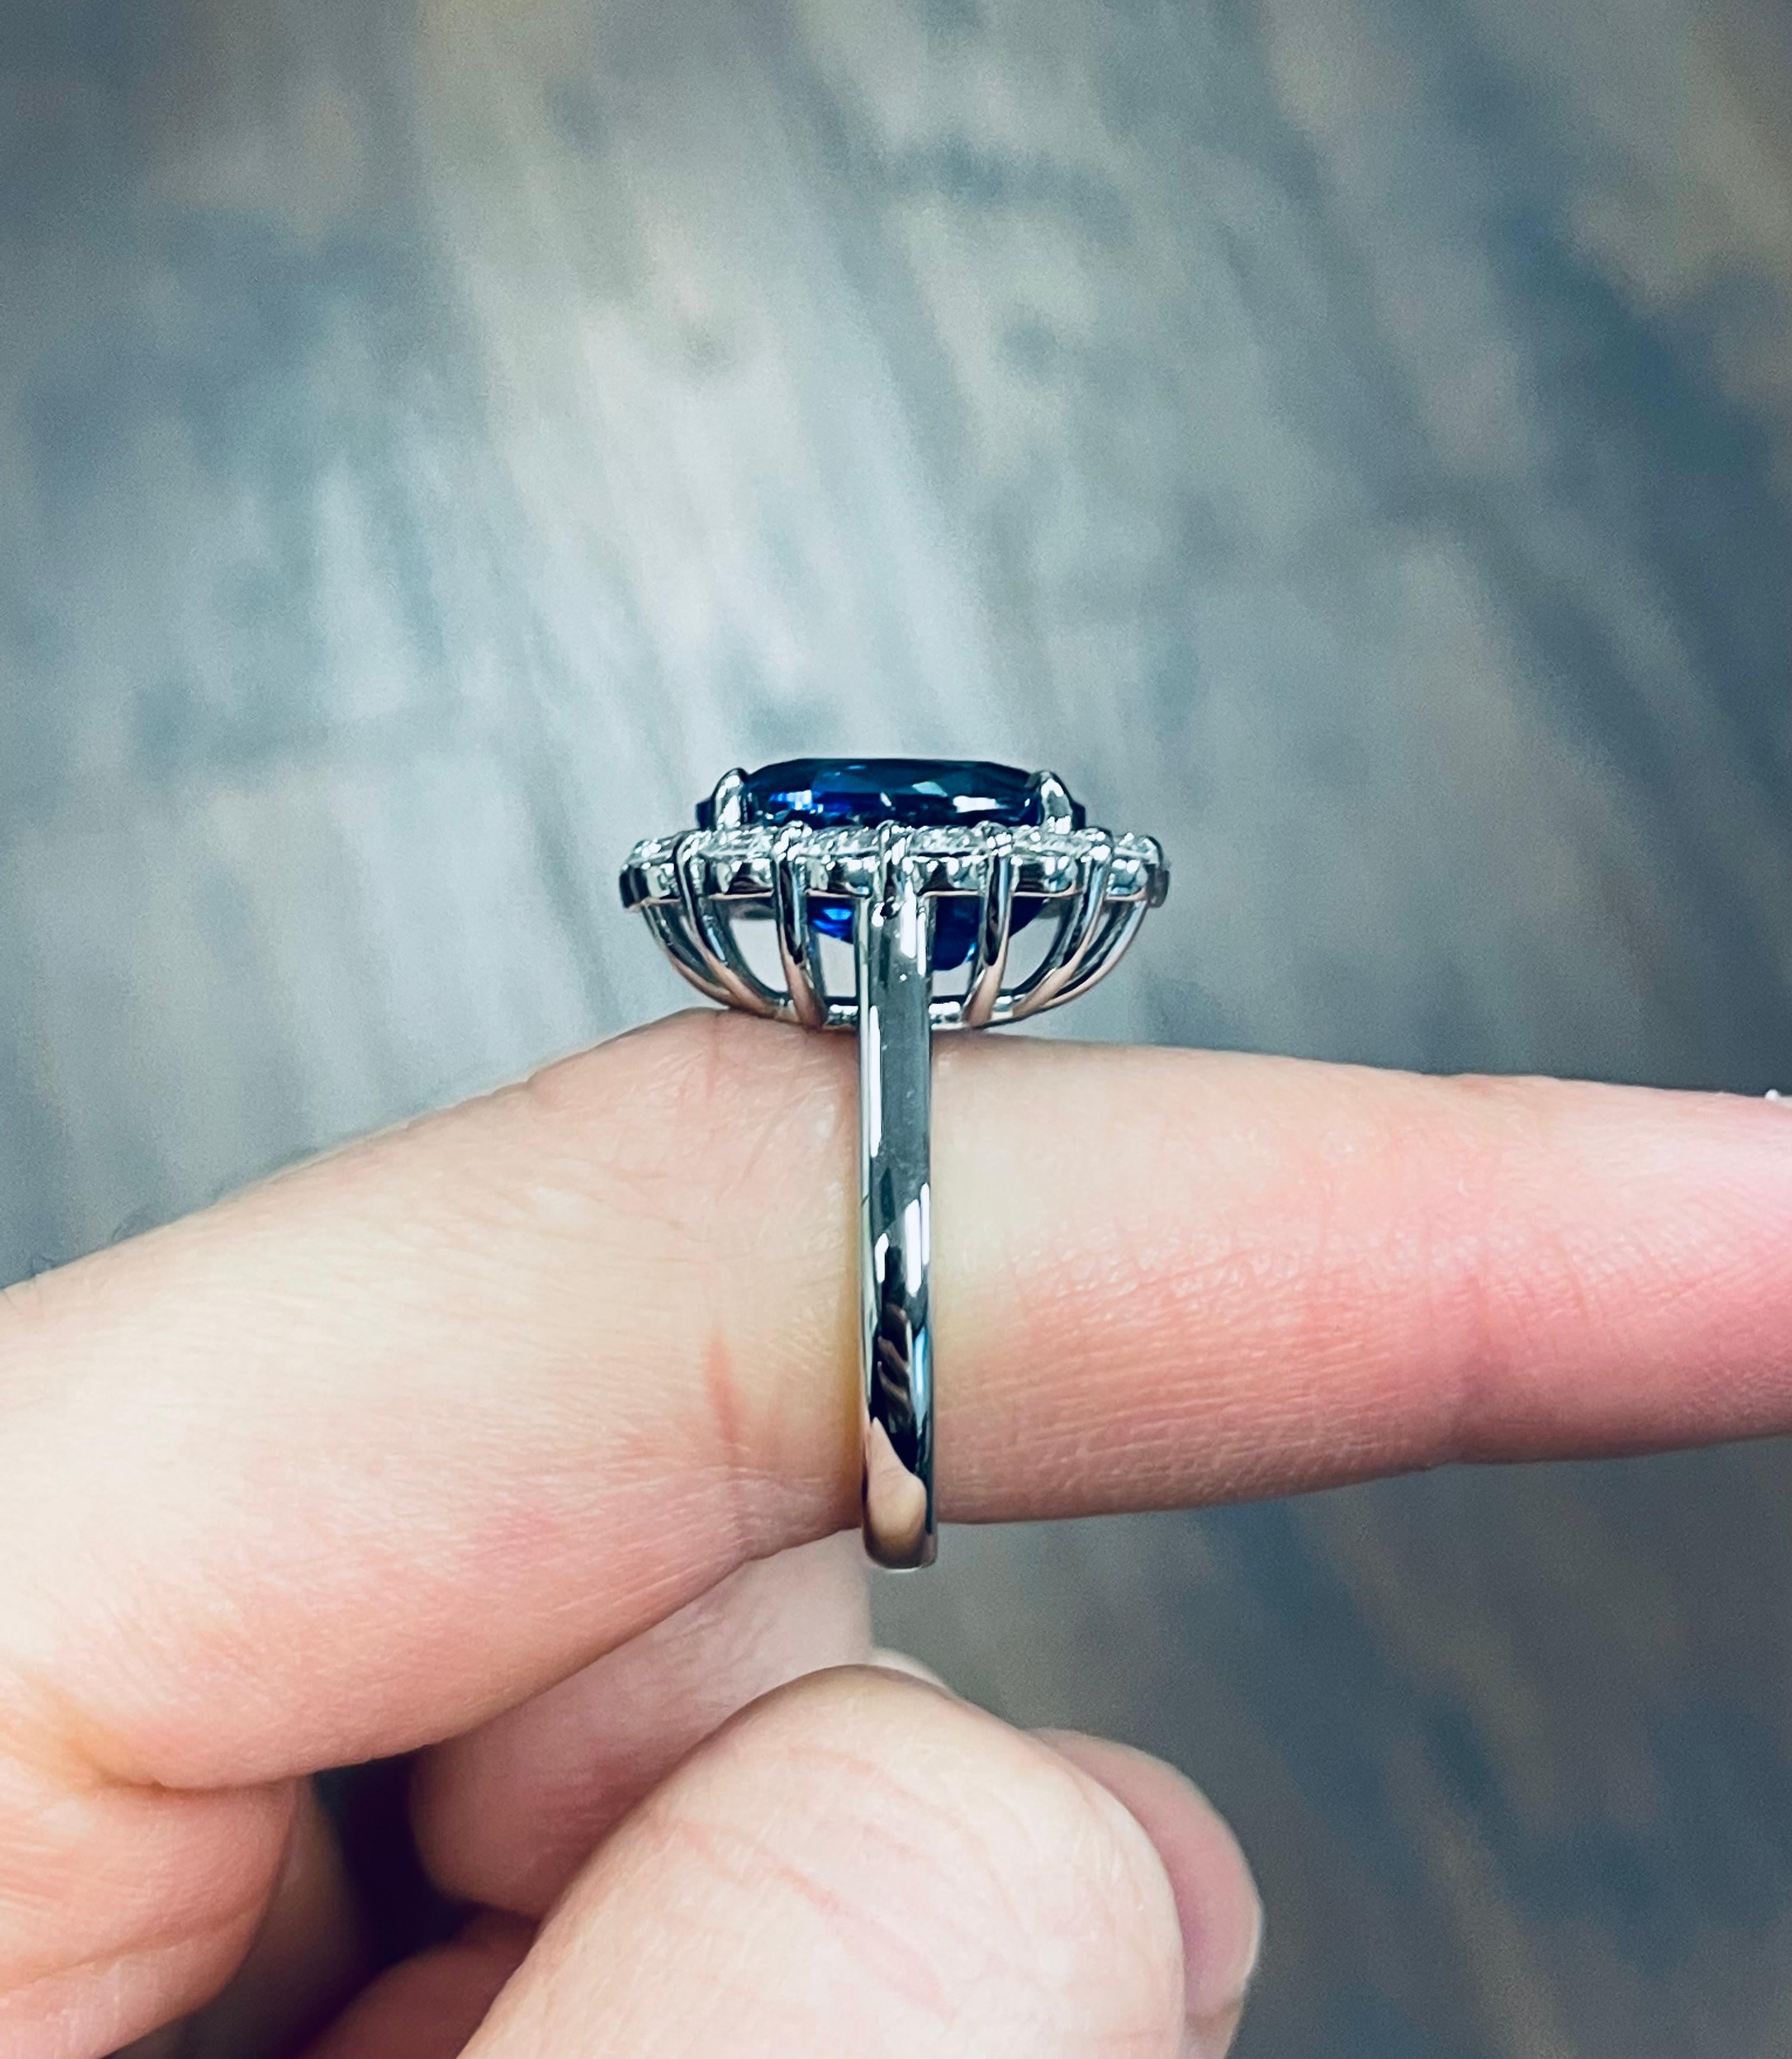 Setting:
Halo
Platinum

Center Stone: GRS Certified Oval Cut Sapphire Halo Engagement Ring  
Carat Weight: 9.13
Color: Vivid Blue 
*CERT ATTACHED TO PICTURE SET*

Side Stones: 
Carat Total Weight: 1.68
Color: G-H
14 Stones

•Free Worldwide